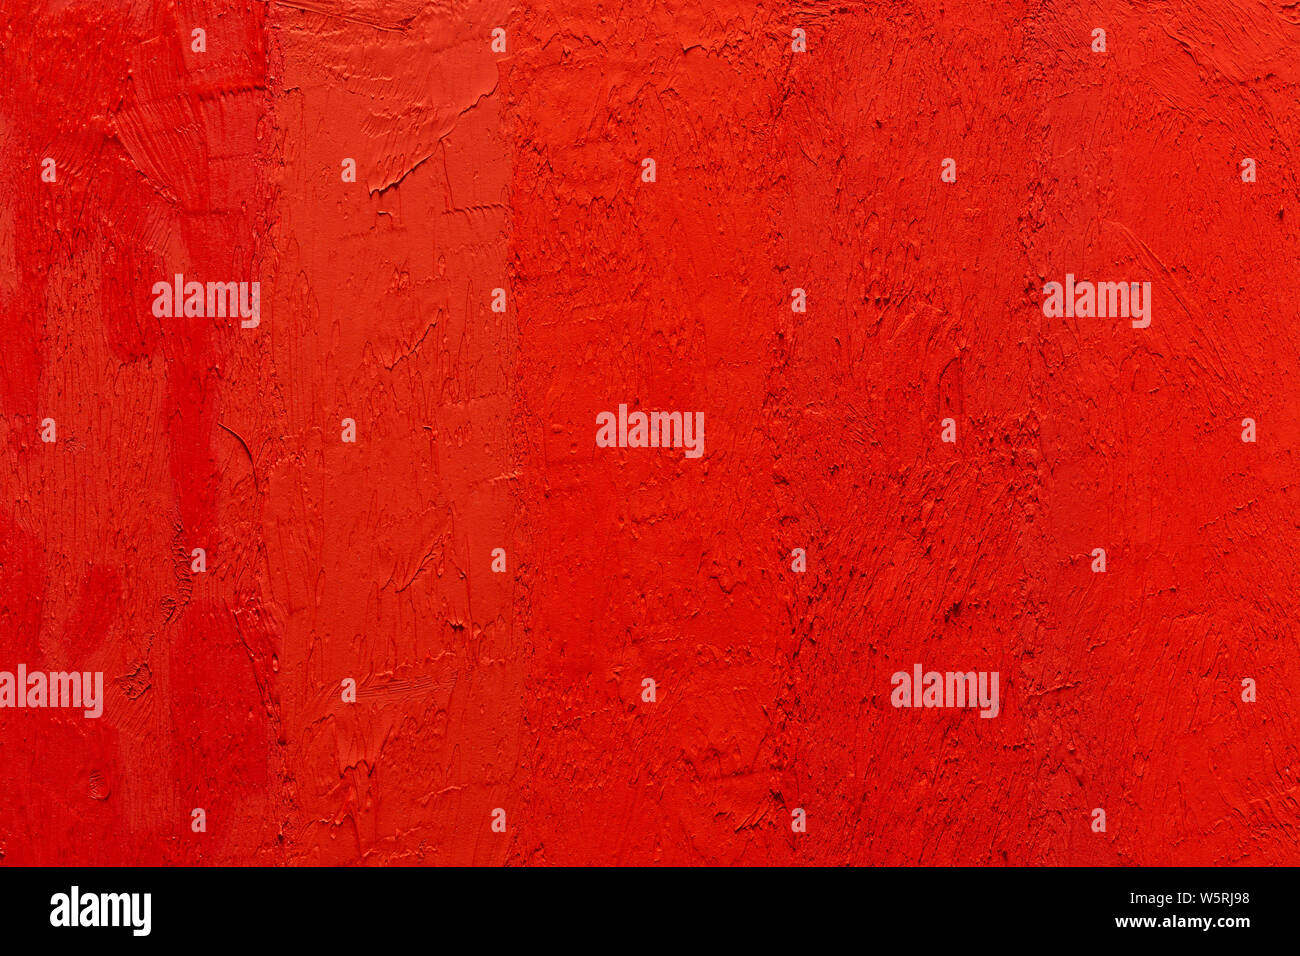 abstract real egg tempera painting with vermillion red color pigments, abstract background Stock Photo